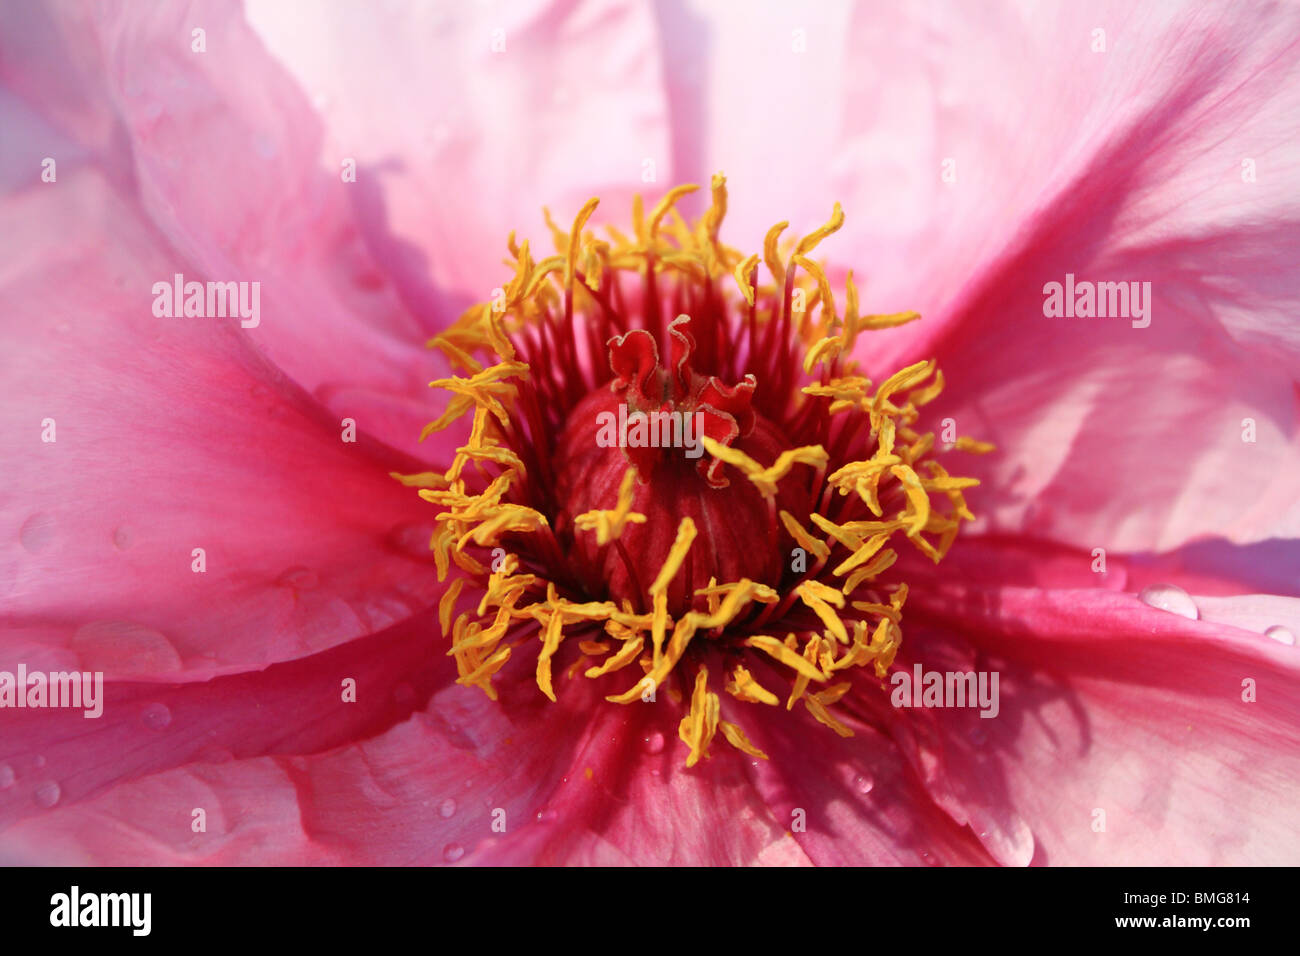 Stamens and pistils of pink peony flower, Yuanmingyuan Park, Beijing, China Stock Photo